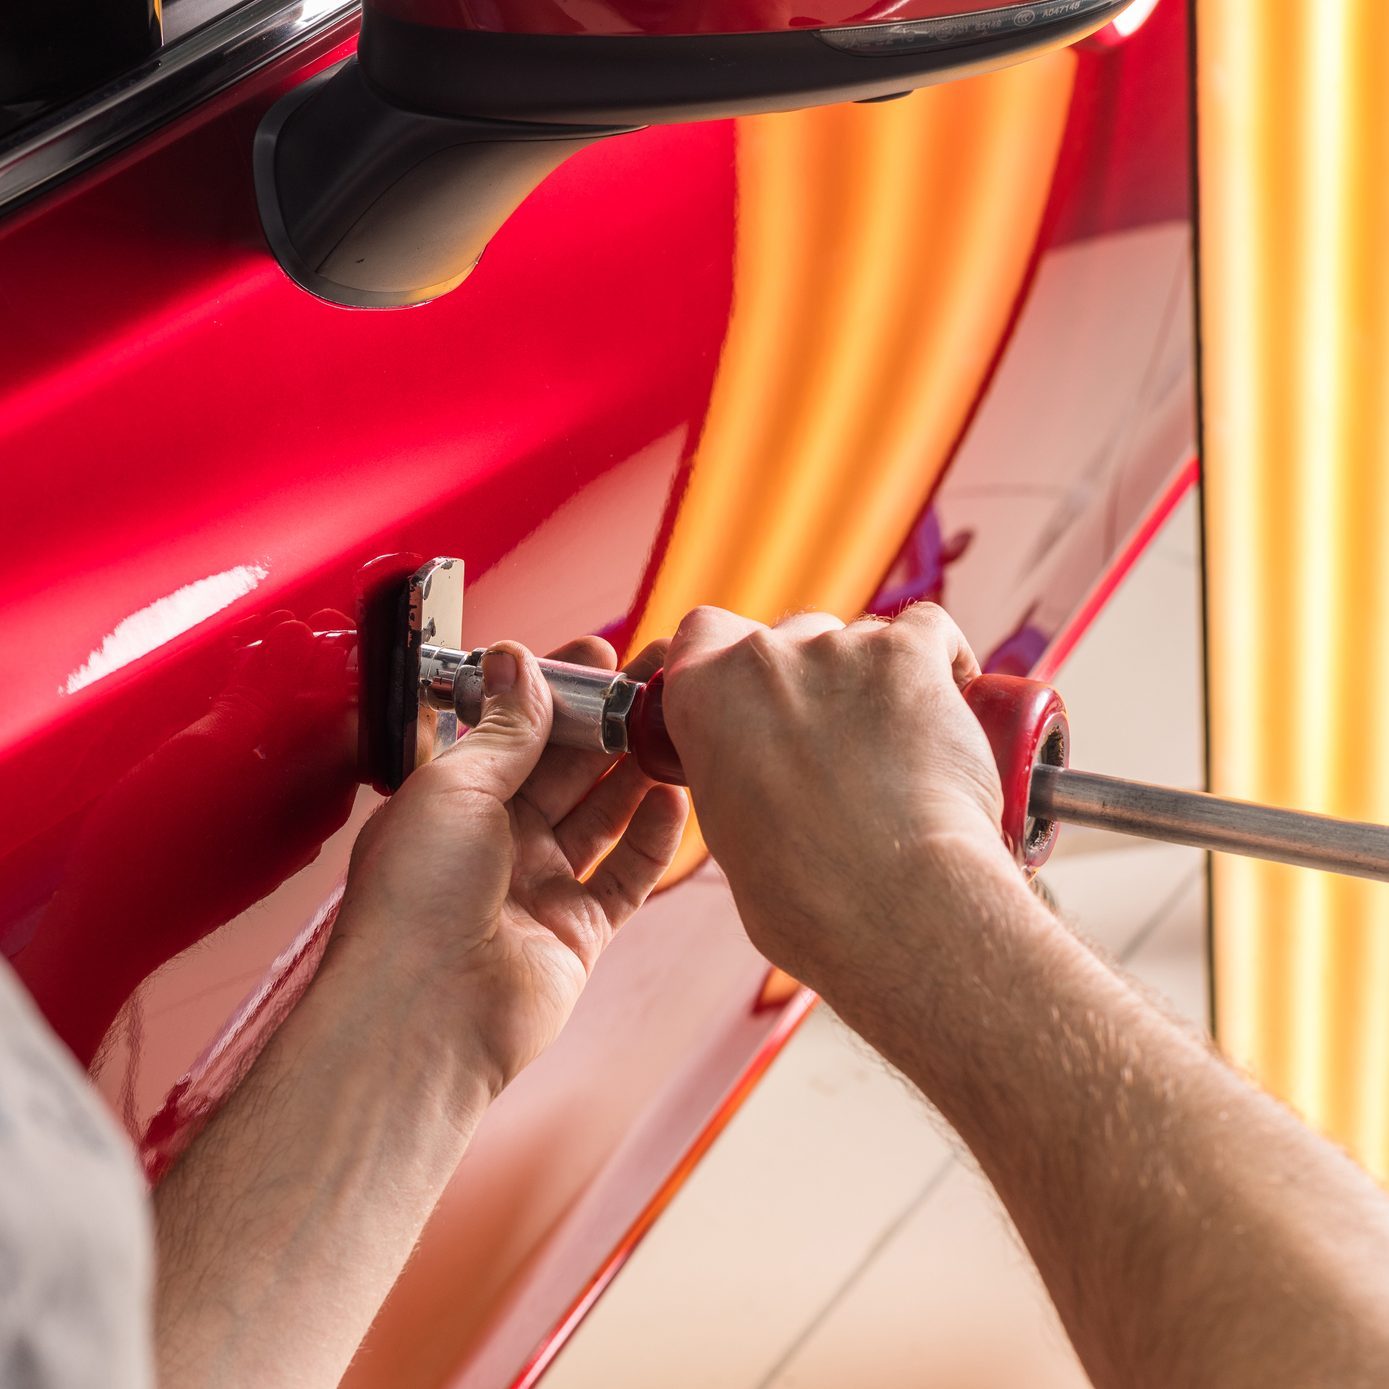 The Best Dent Removal Kit for Every Car, According to Experts